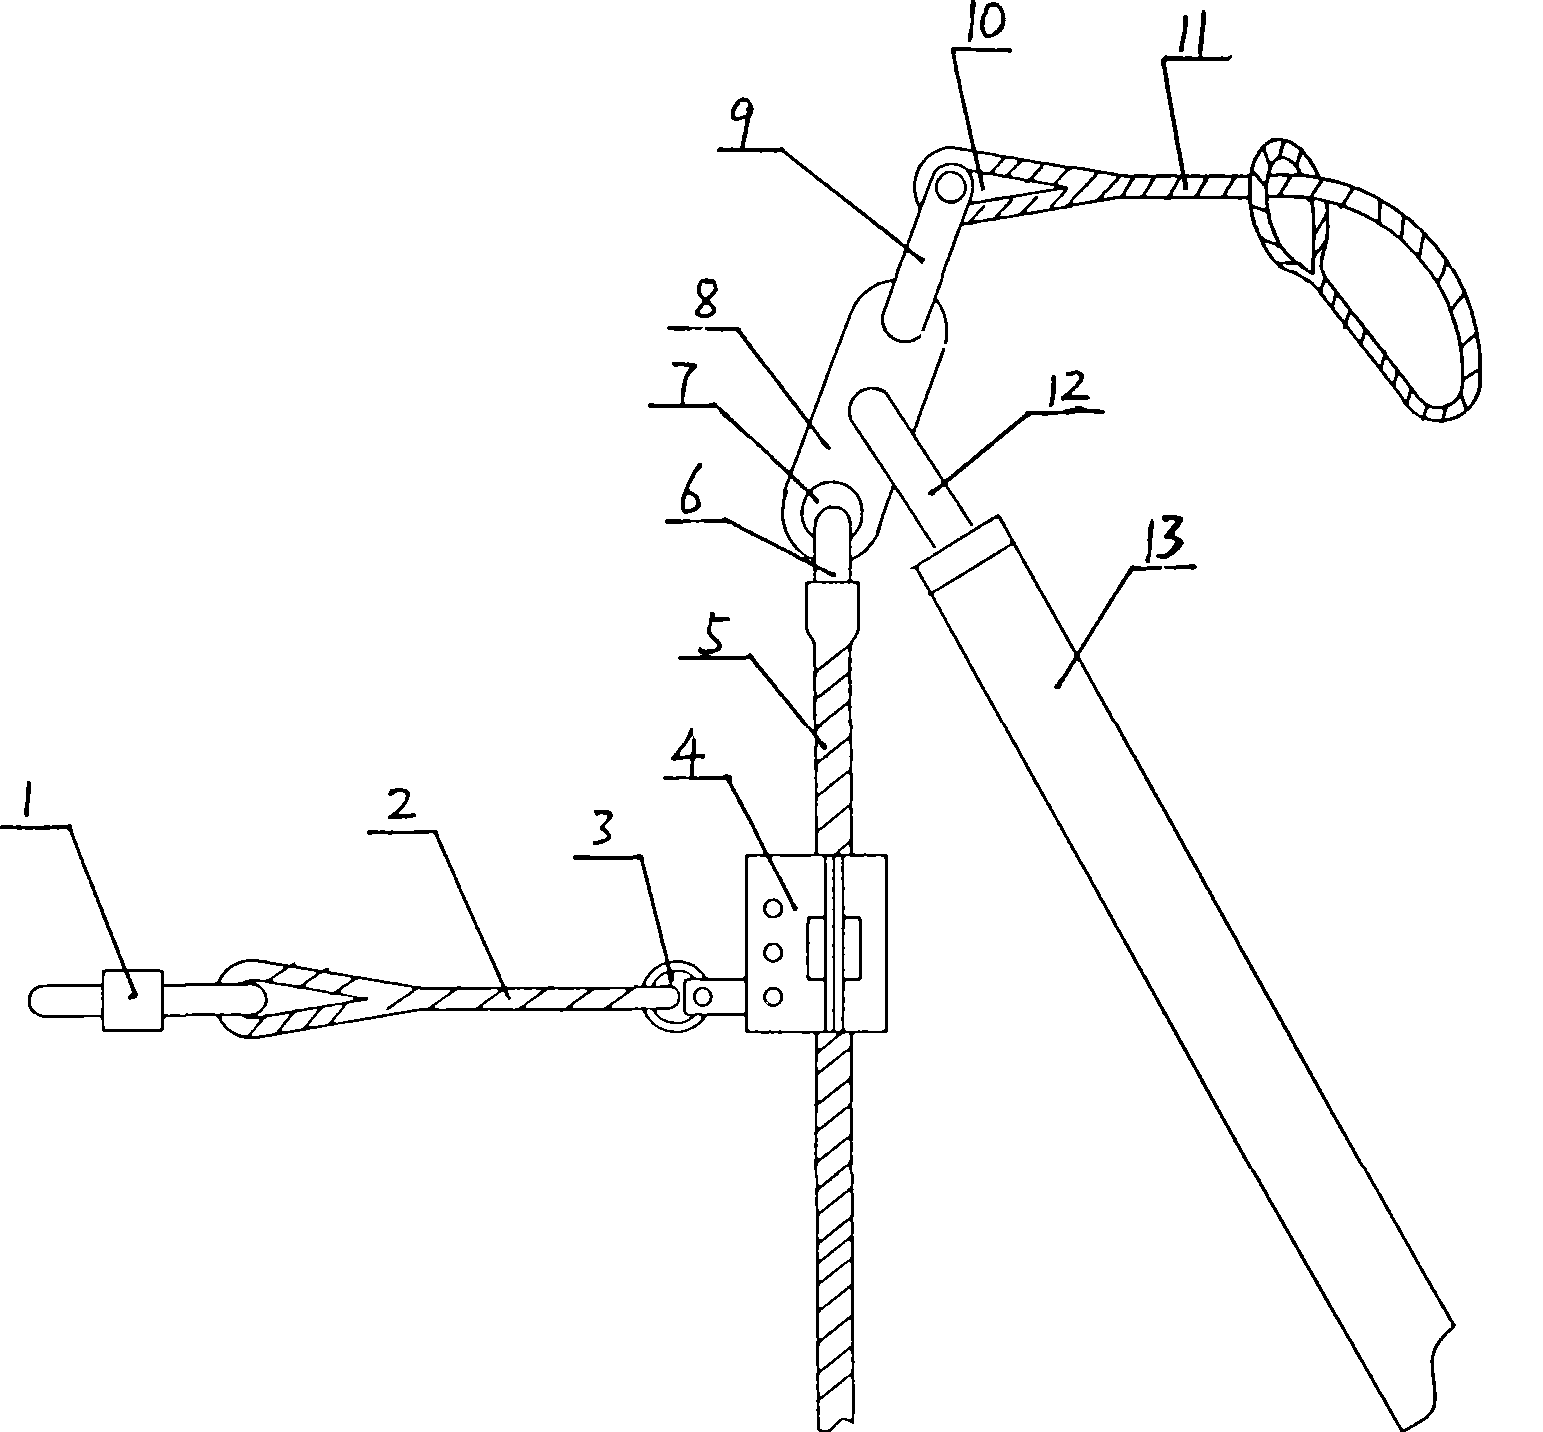 Falling-proof equipment for human on electrical pole with rope sleeve regulating lever